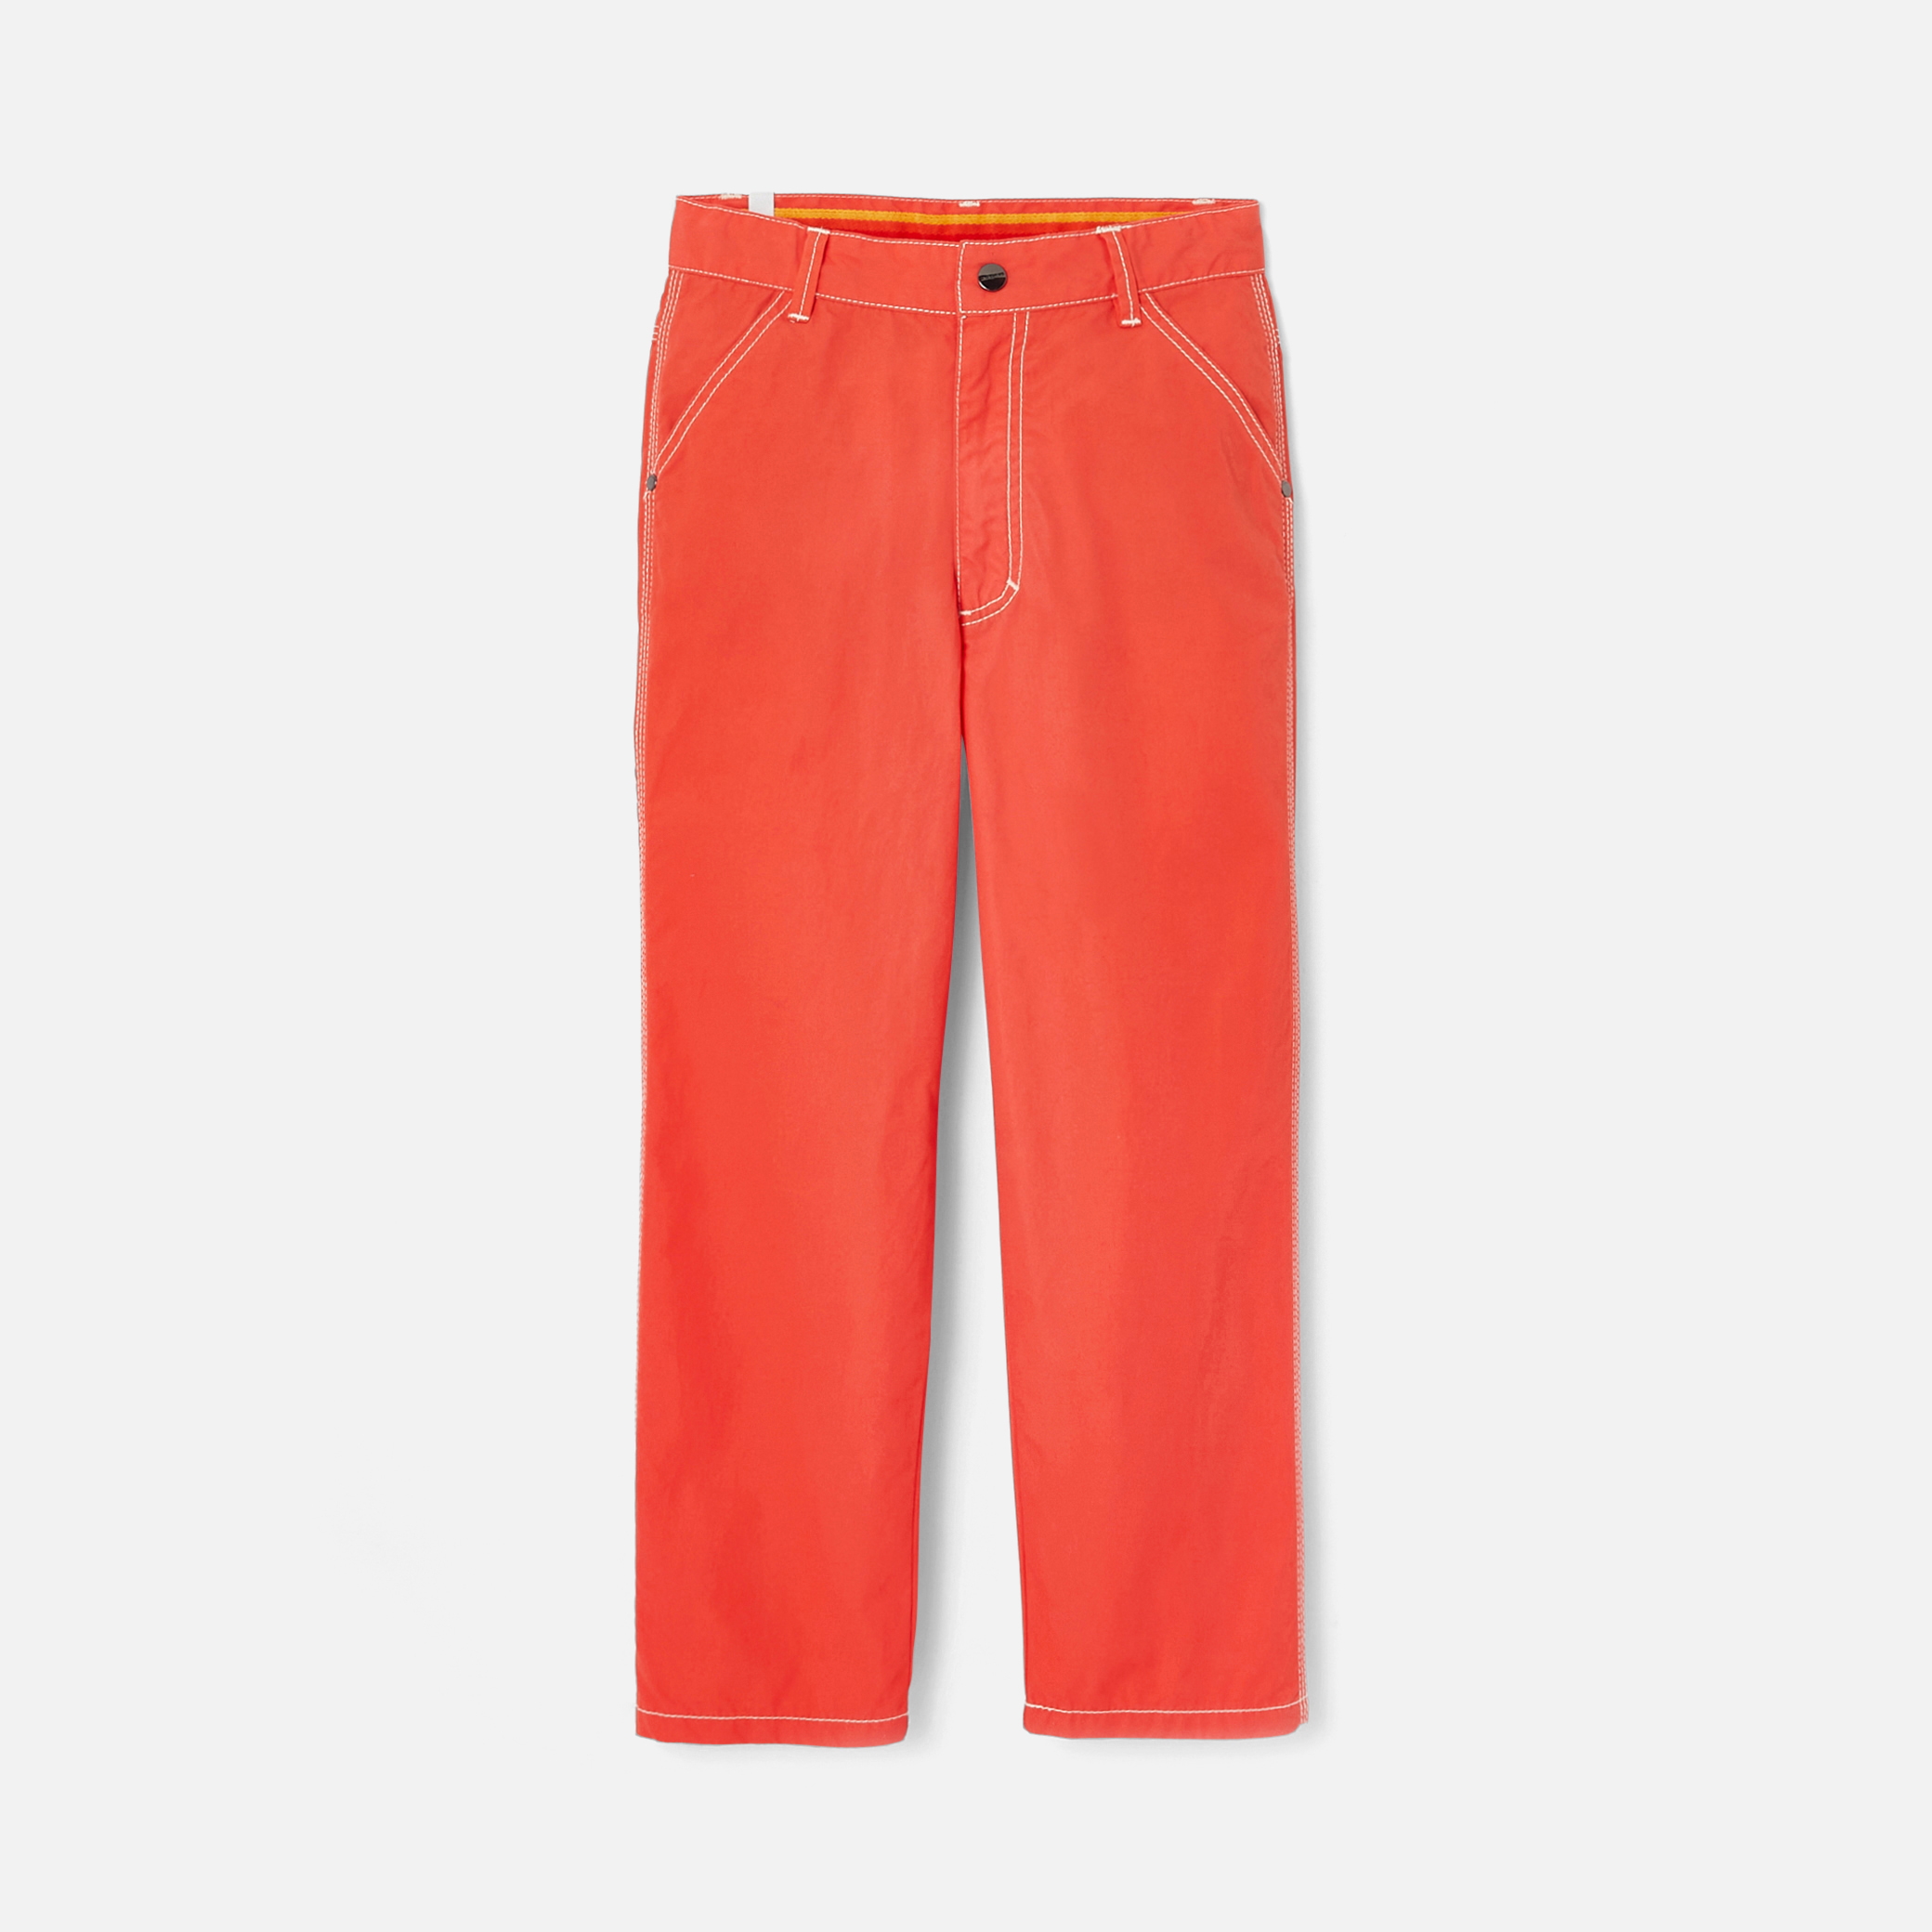 Boy relaxed pants